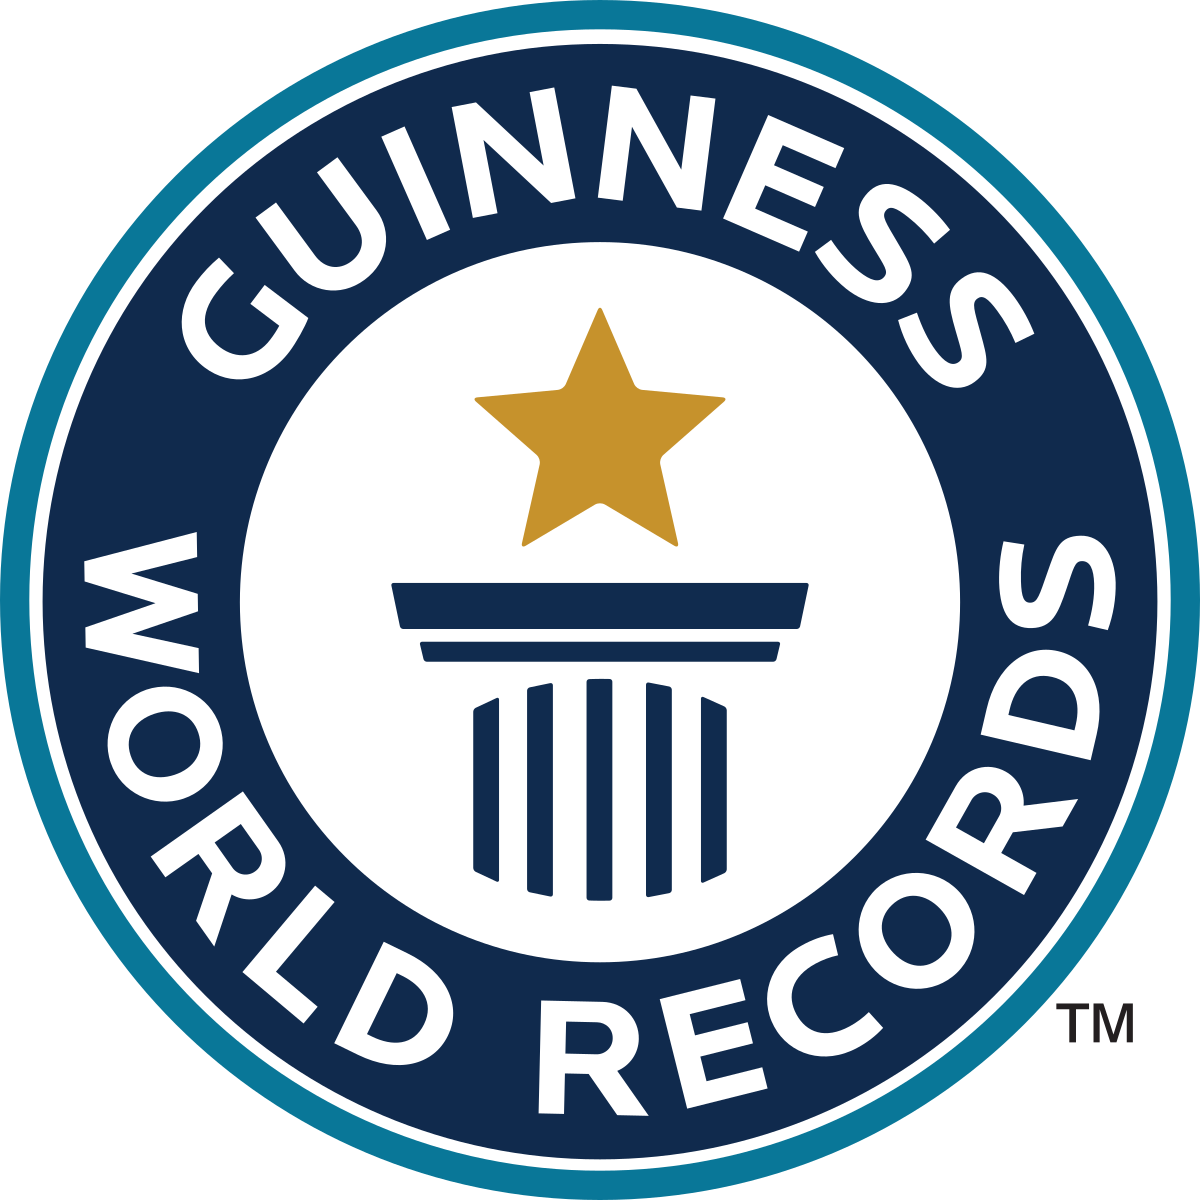 7 Steps To Set Or Break A Guinness World Record